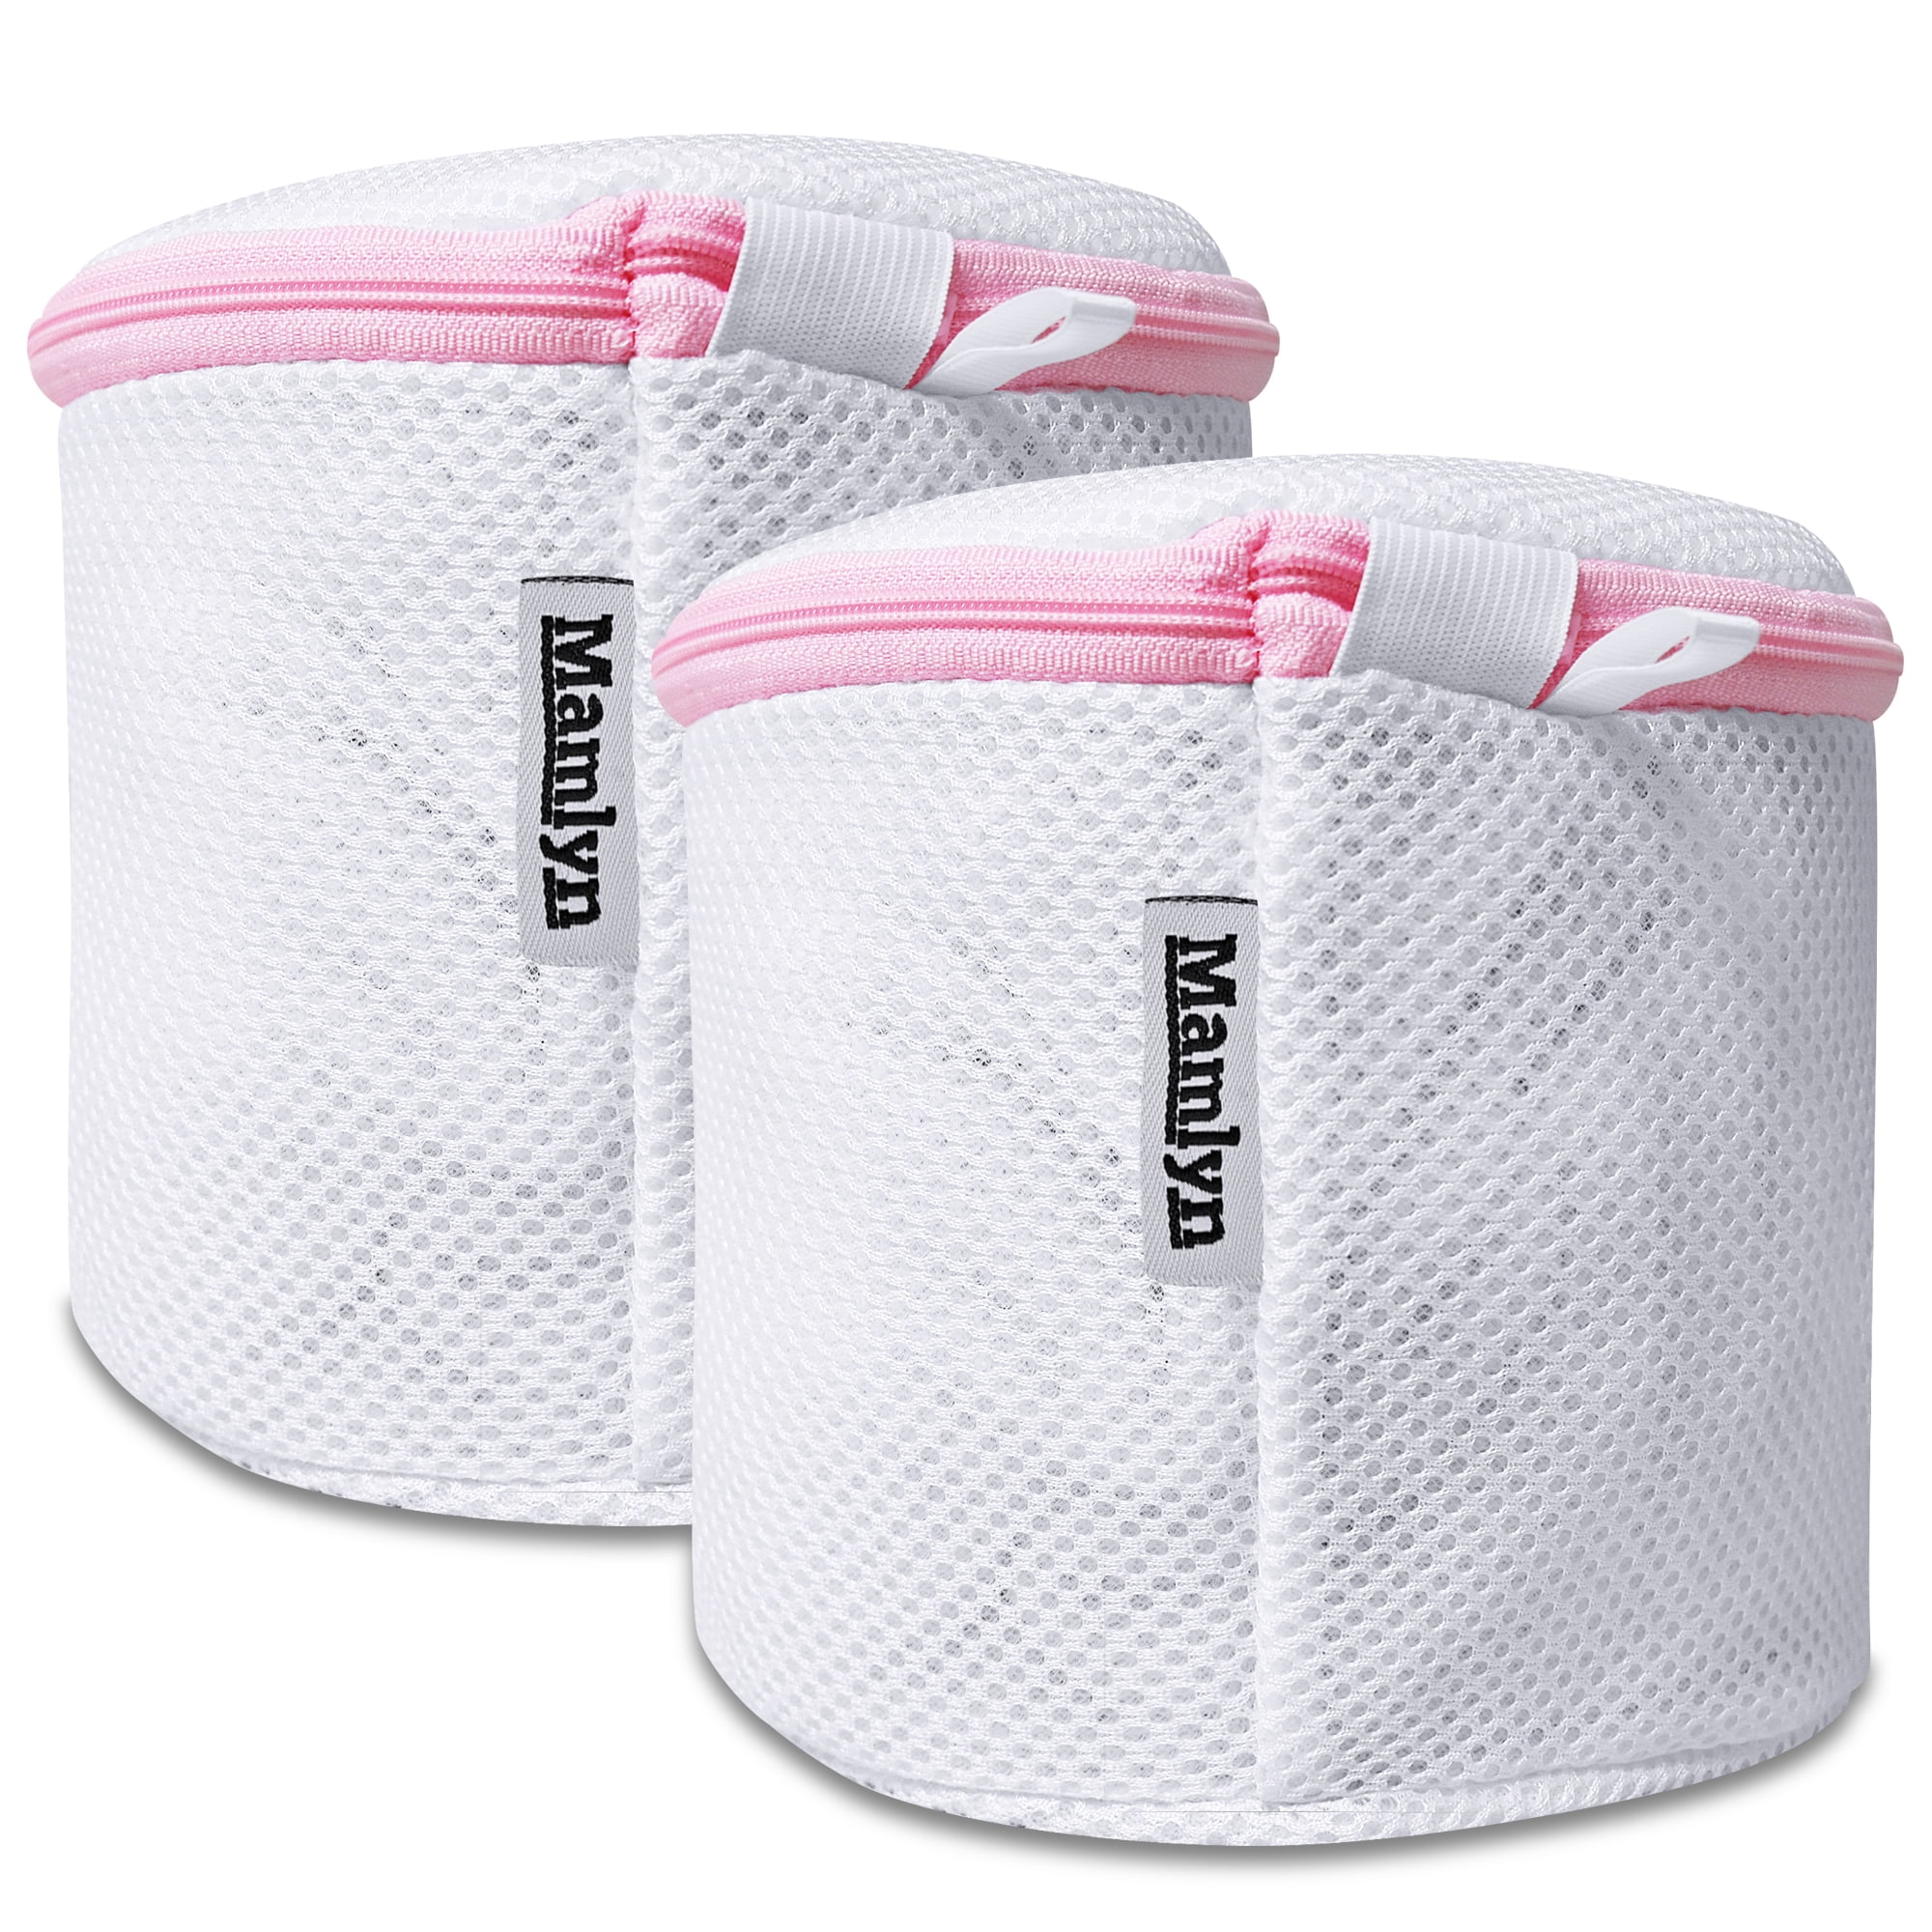 Pack of 2 Delicate Bra Washing bag - Bra Laundry Bags for Washing Machine,  High Permeability Sandwich Fabric Lingerie Large Laundry Bag- Delicates  Underwear Bag for Bras,socks,Panty,Undershirt : : Home